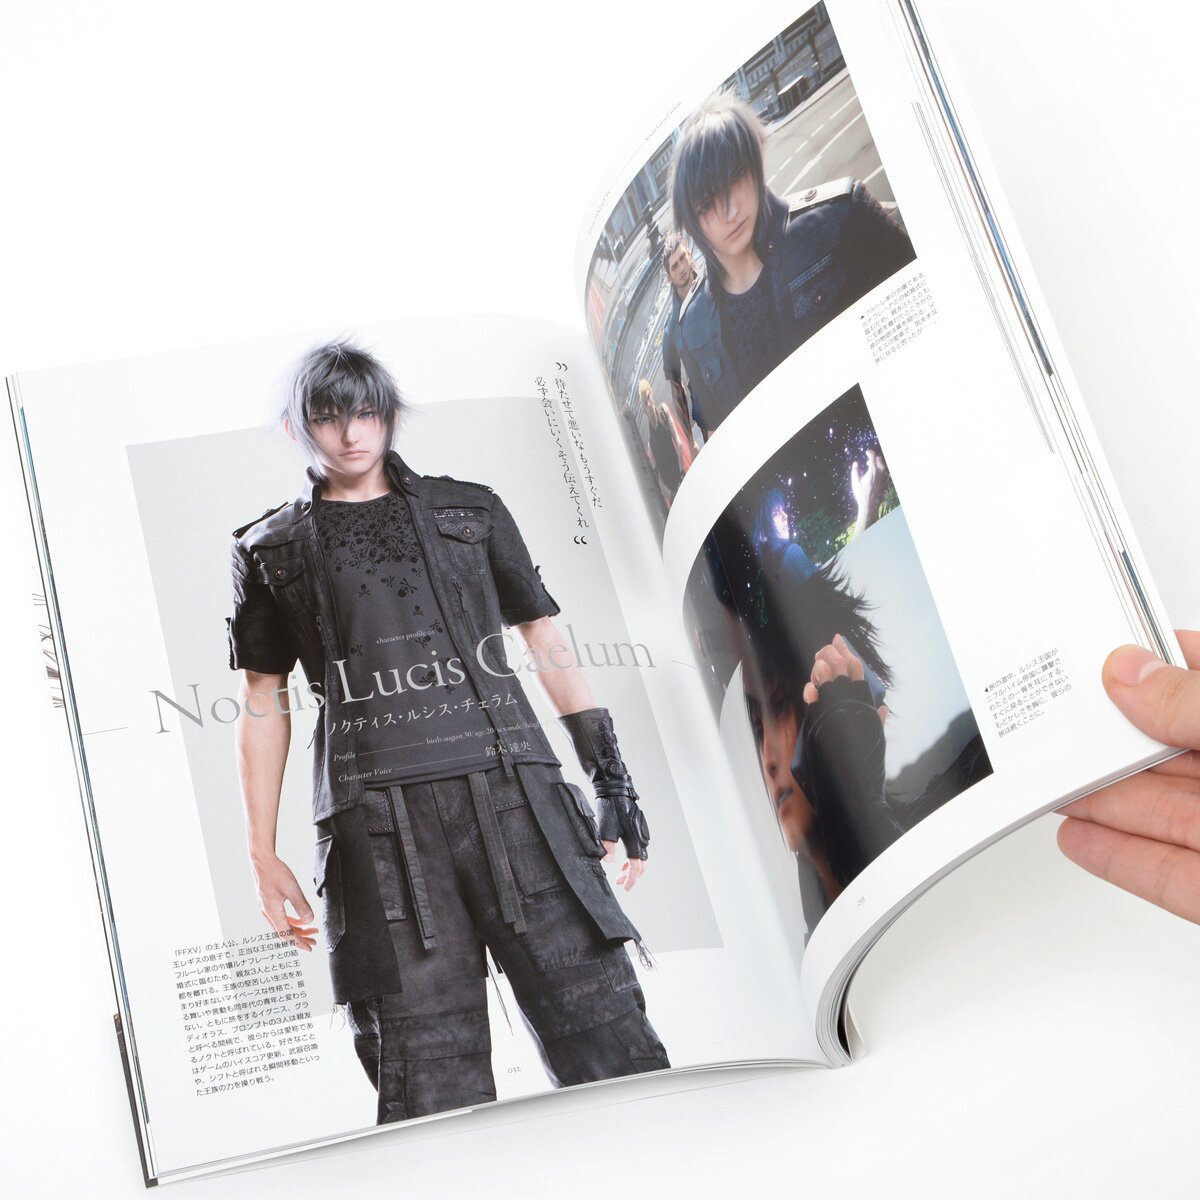 FINAL FANTASY XV - OFFICIAL WORKS